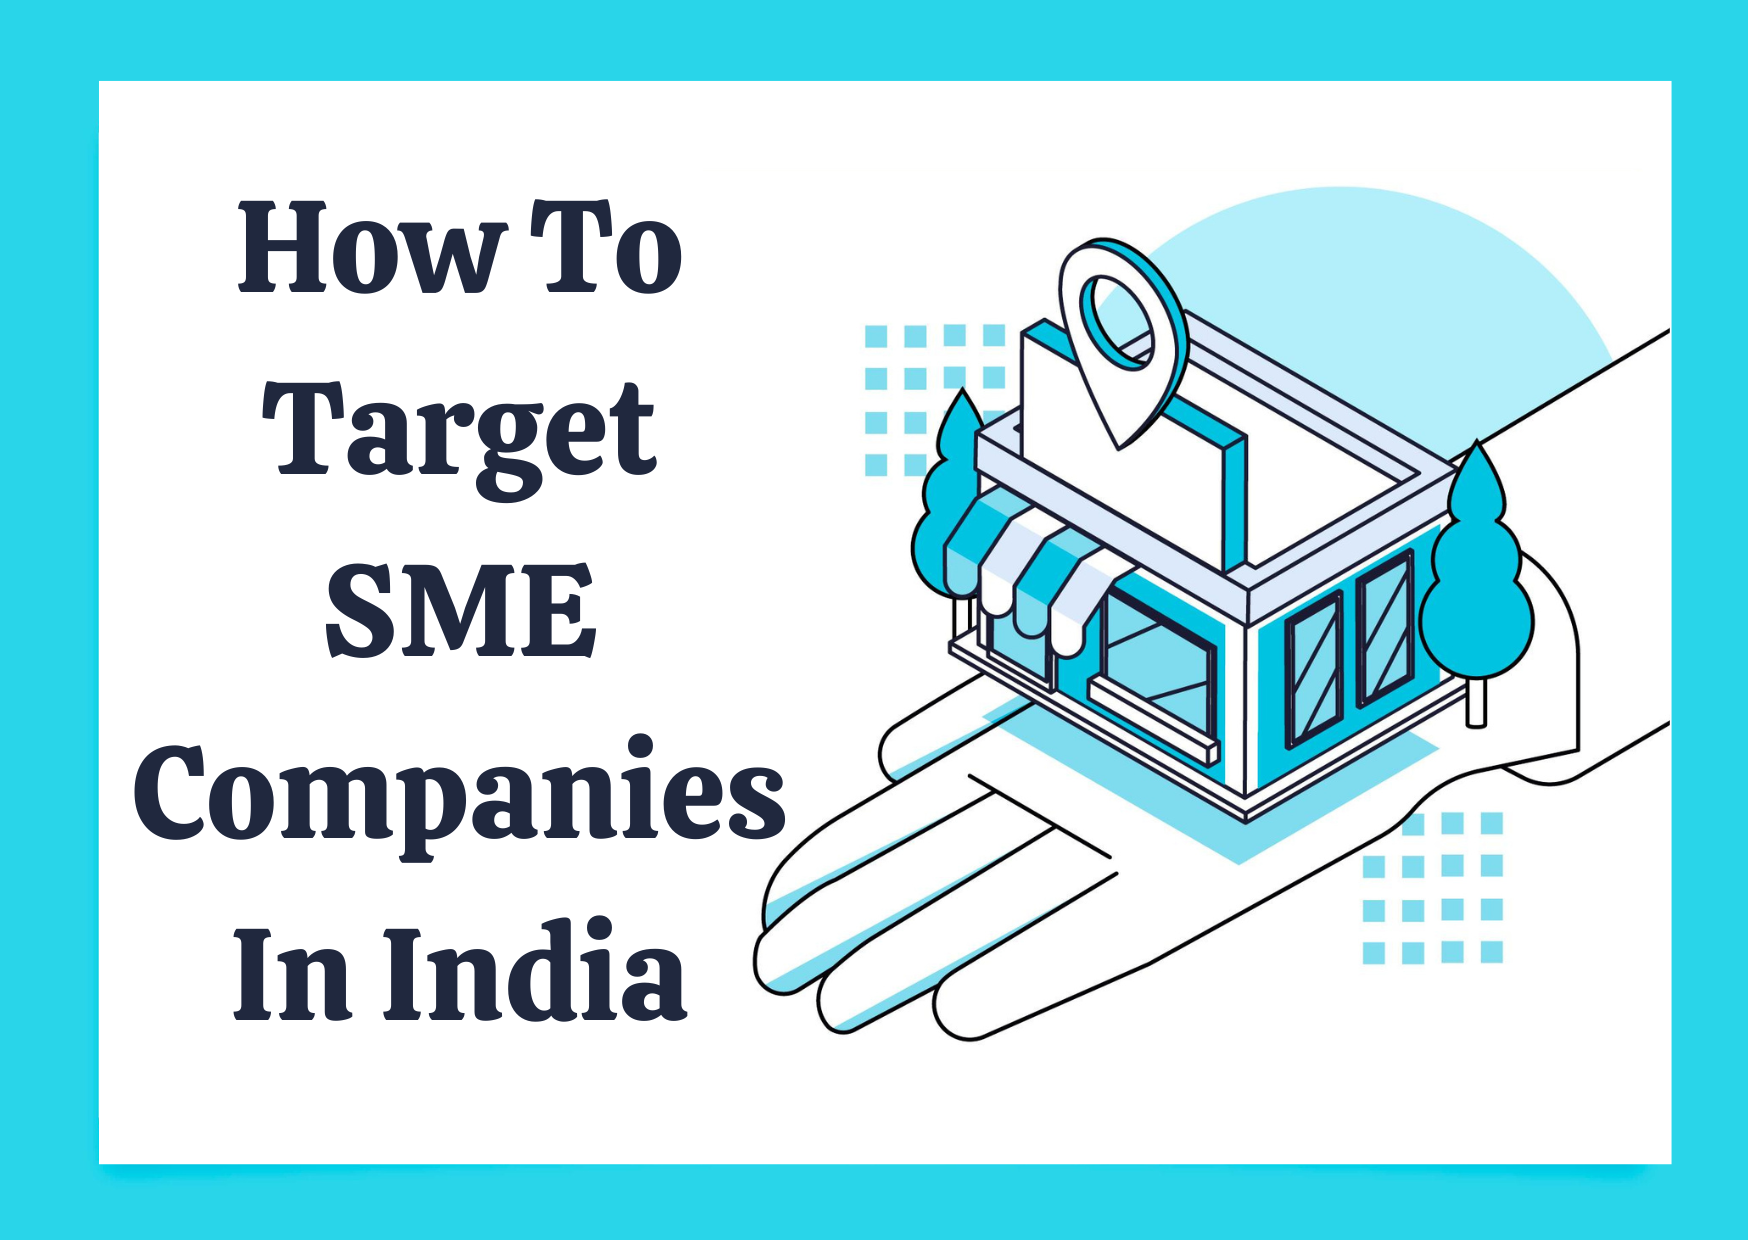 How To Target SME Companies